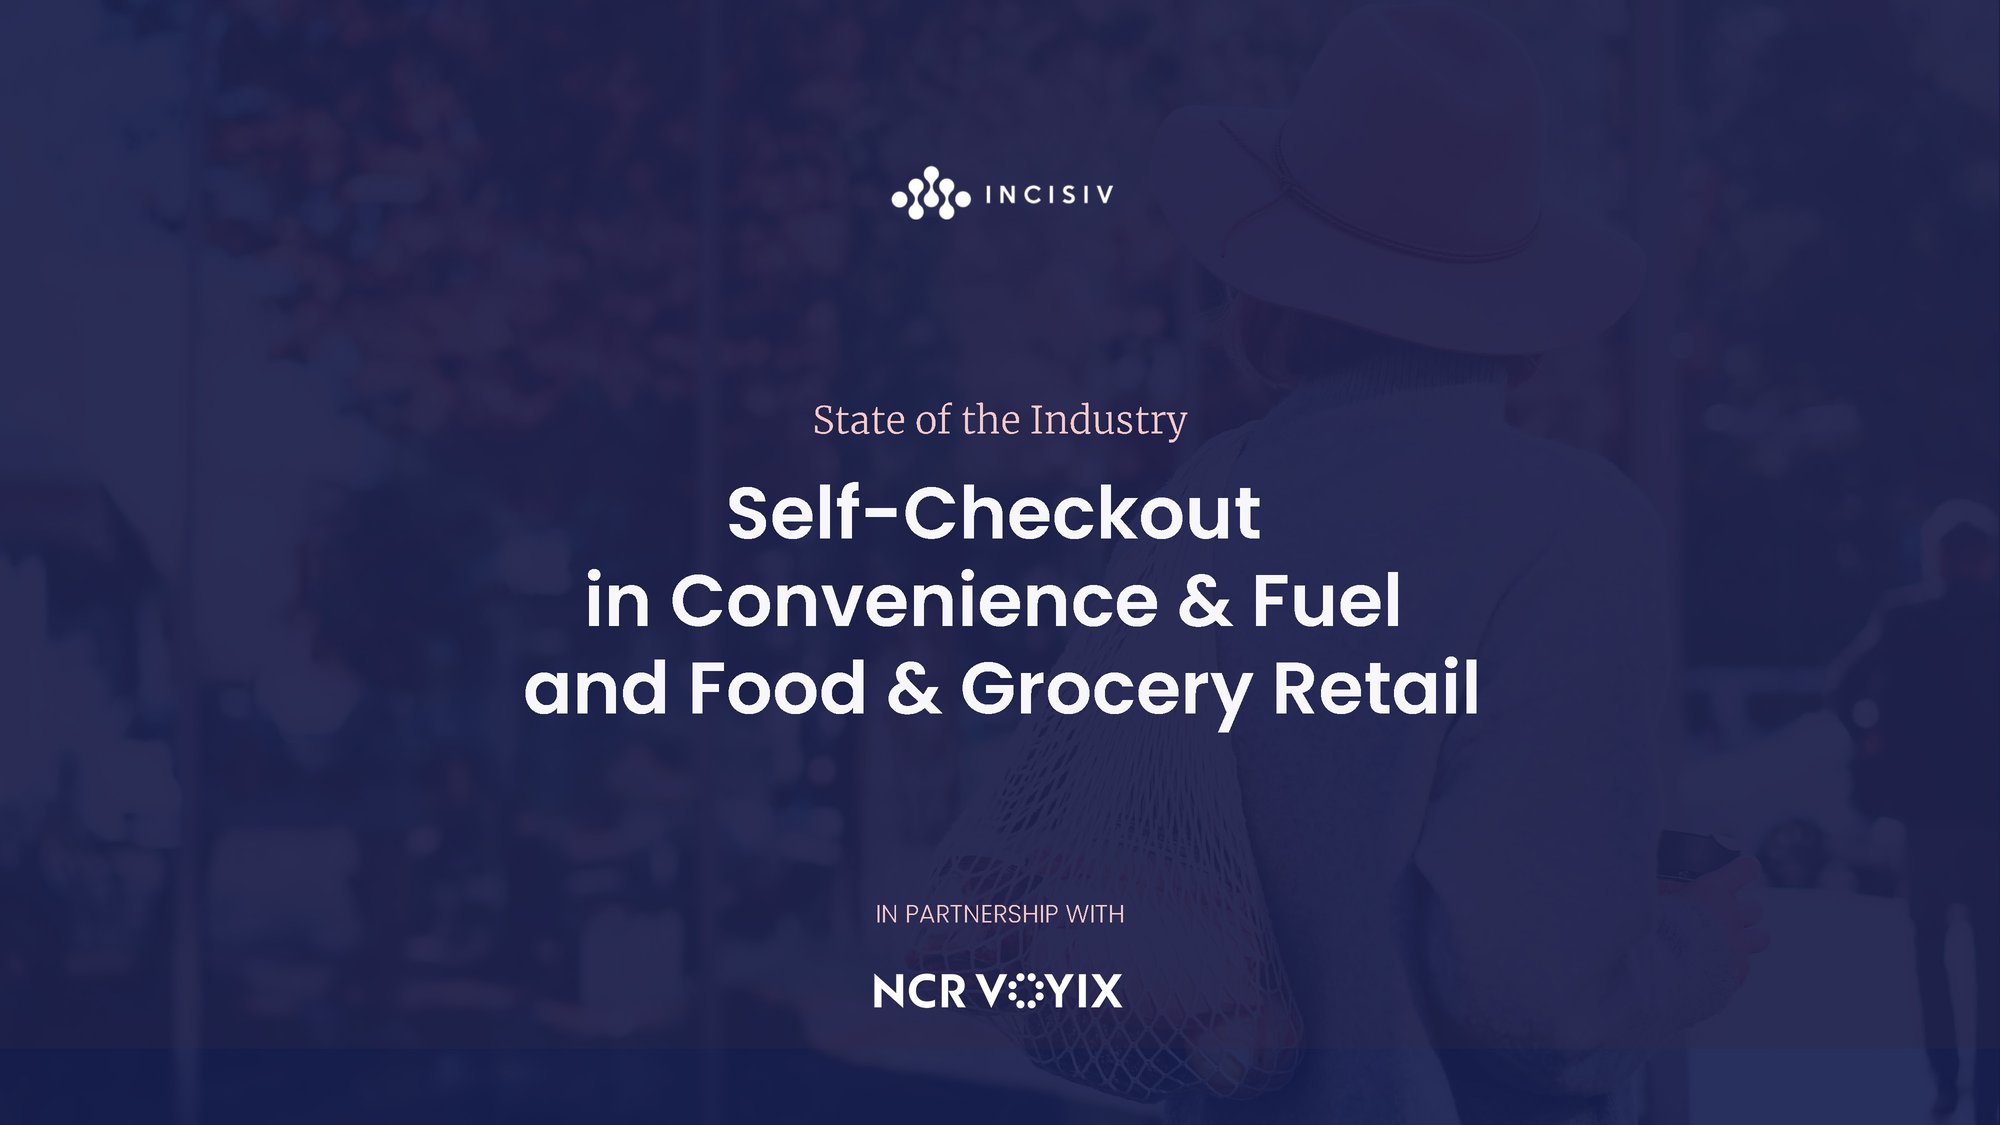 Self-Checkout in Convenience and Grocery Retail